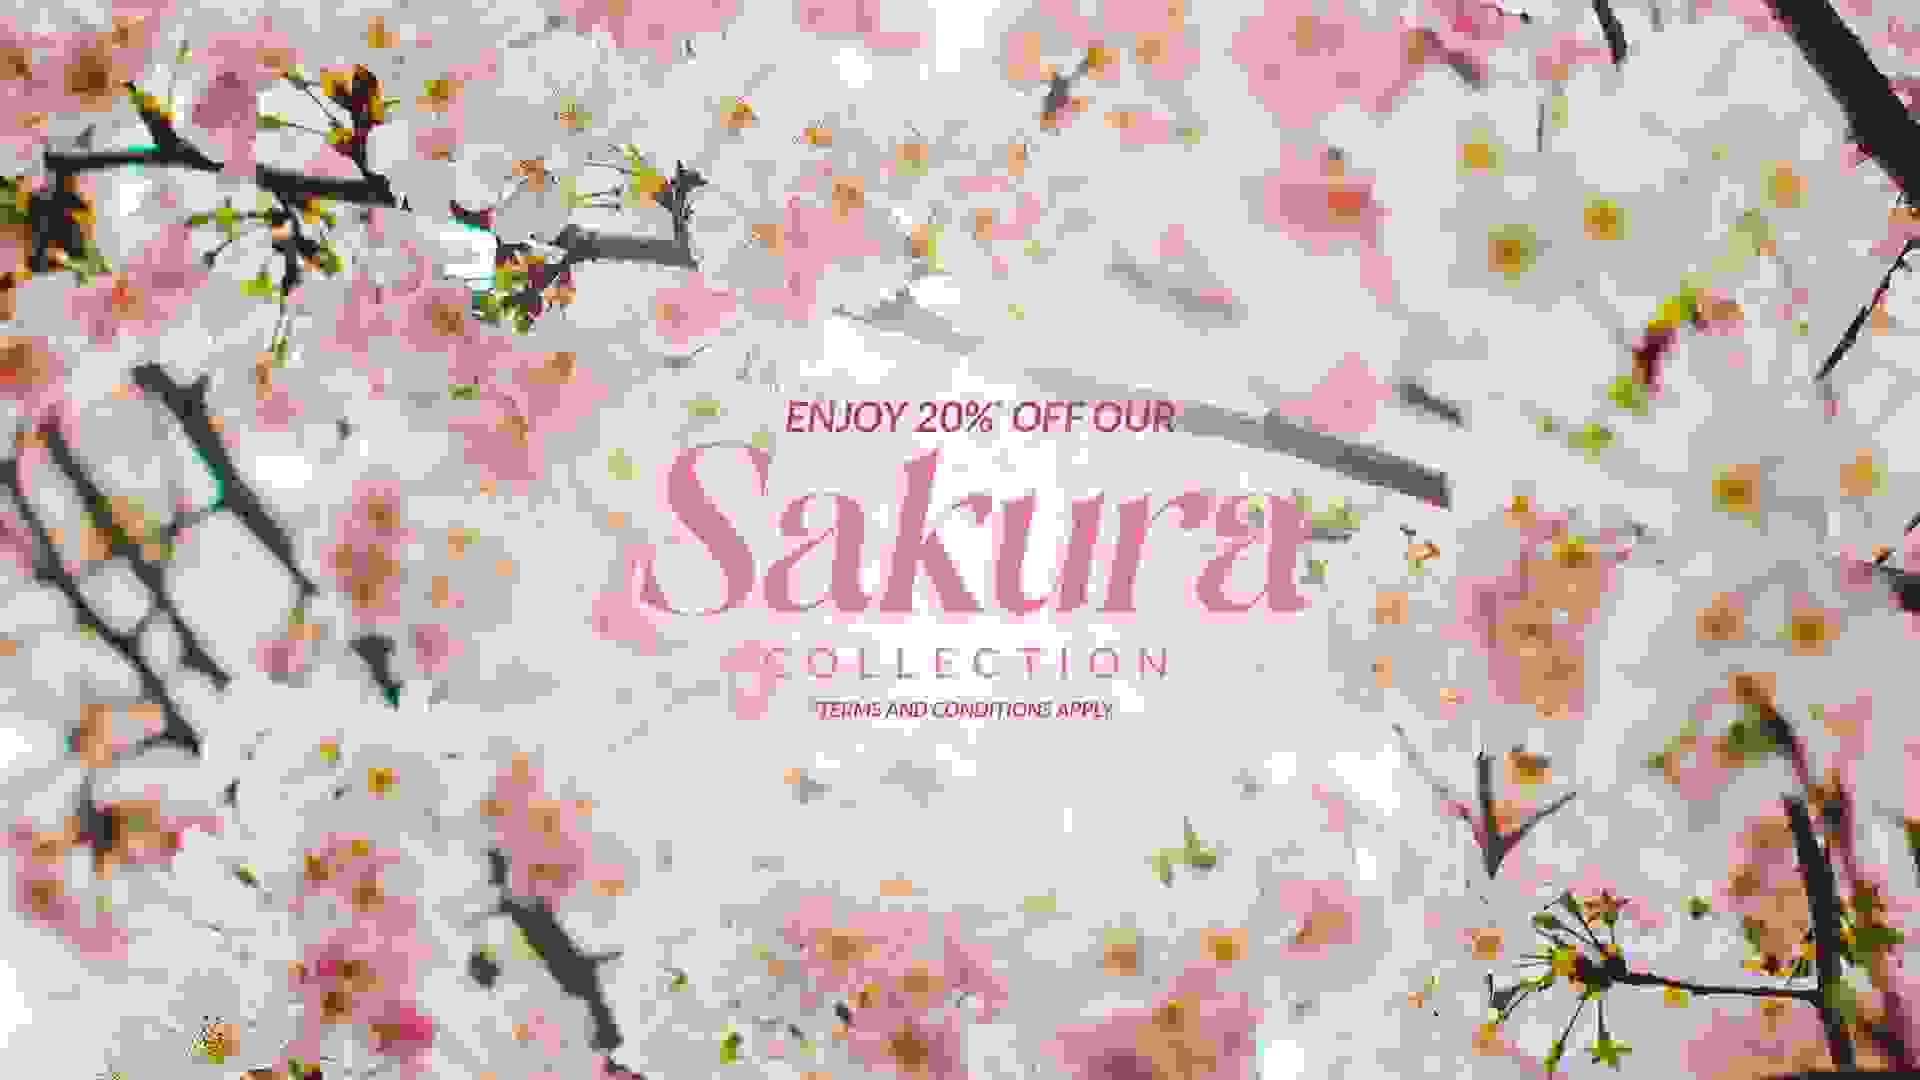 Enjoy 20% off our Sakura Collection, with a minimum spending of $30 per order.